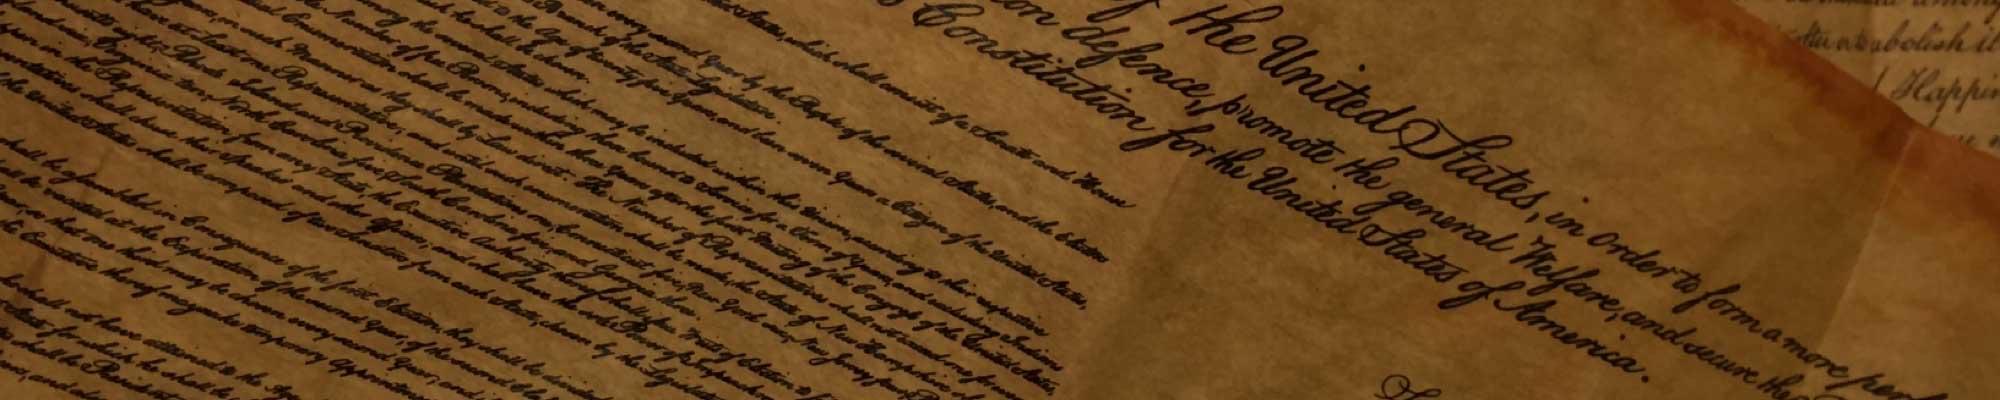 A zoomed in image of the Declaration of Independence.